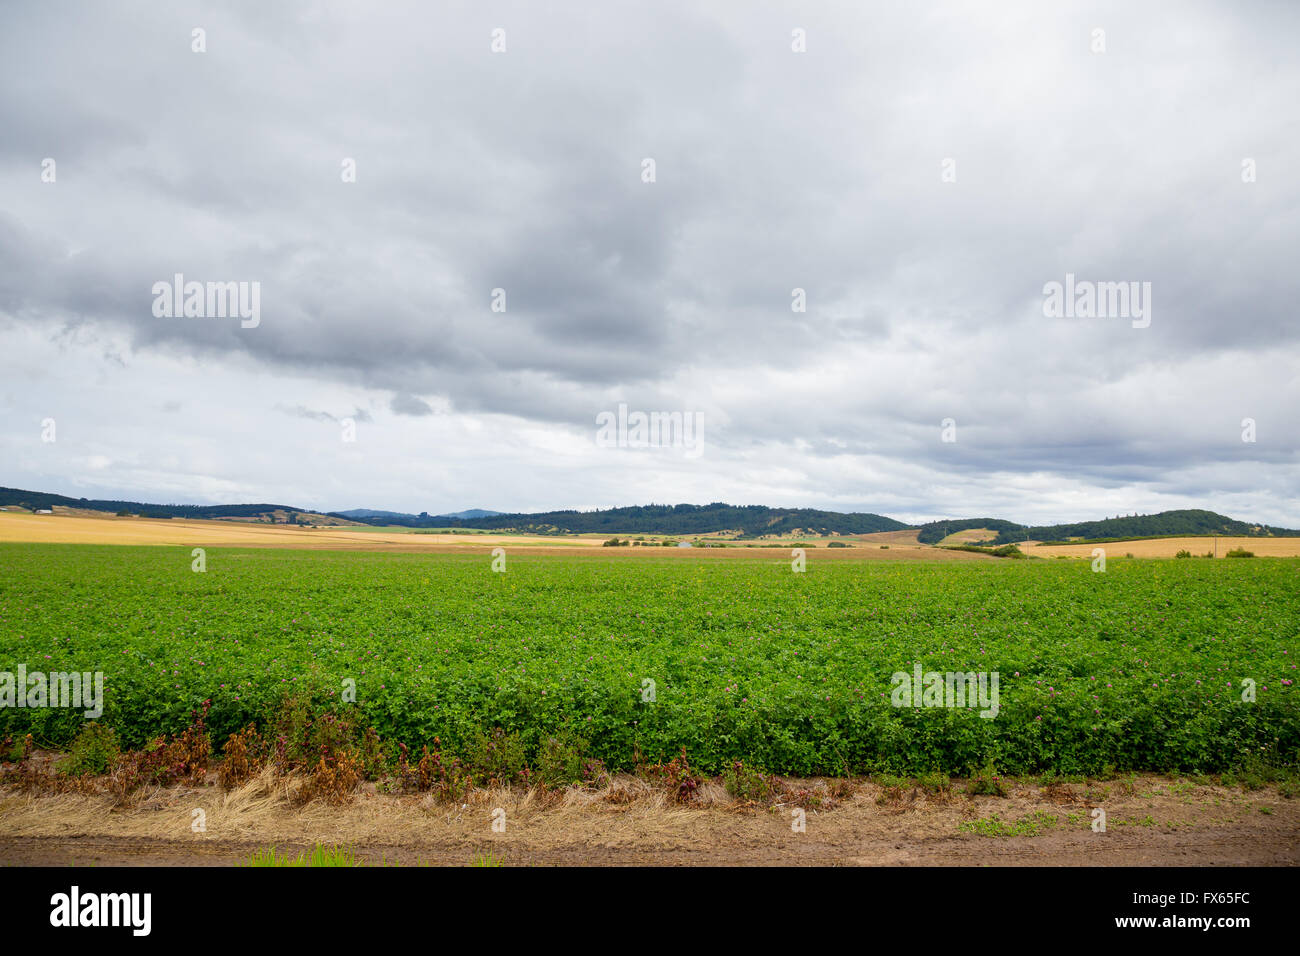 Alfalfa crop in the country grown on a large agriculture farm. Stock Photo